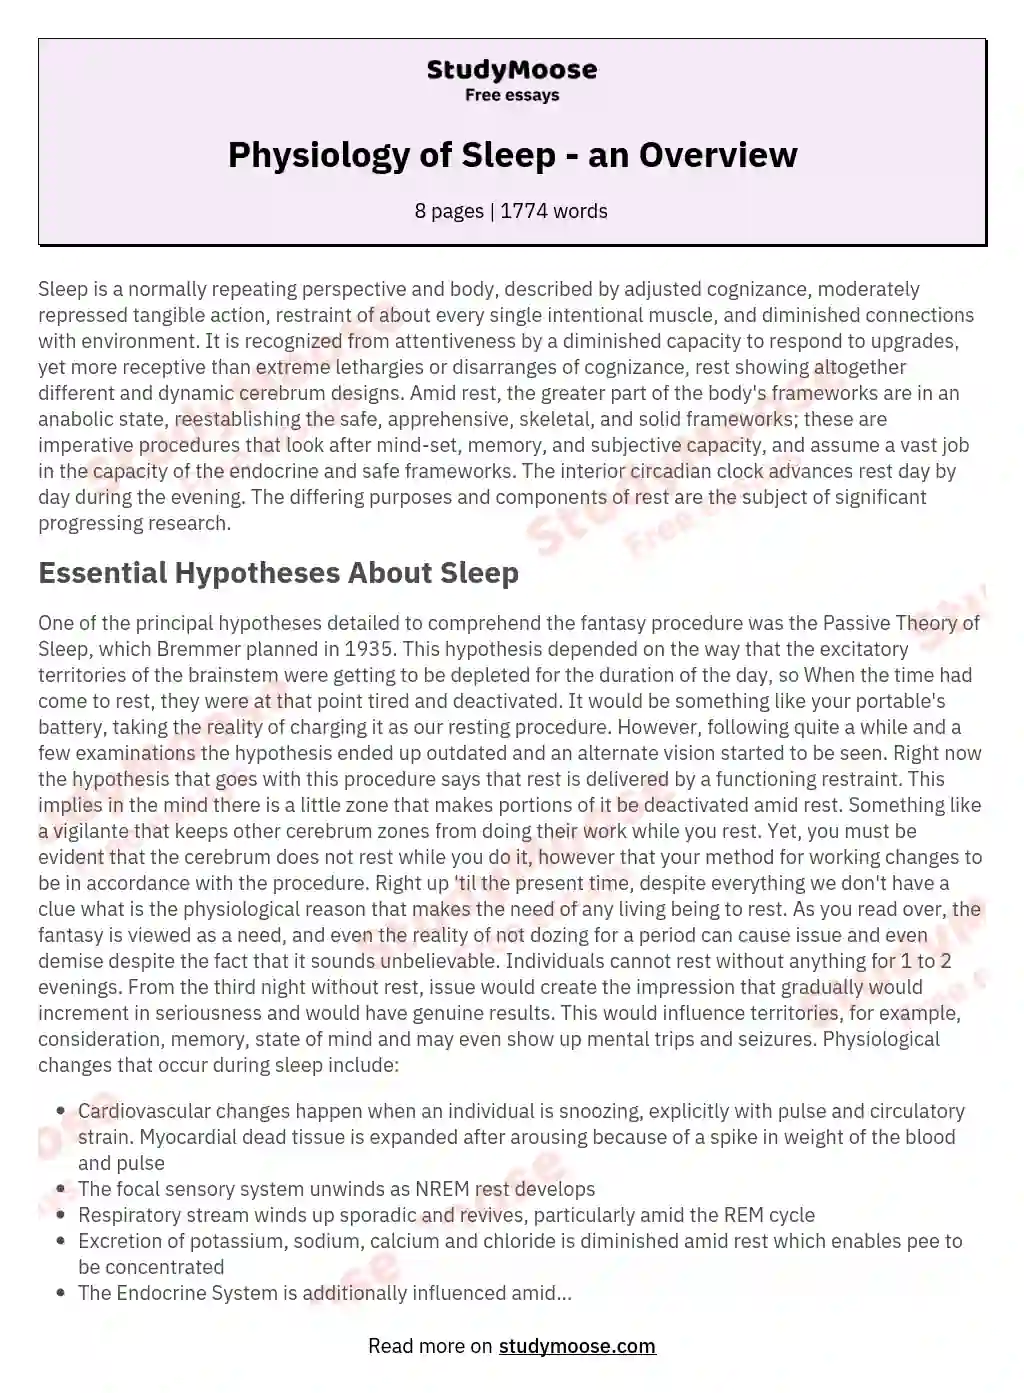 Physiology of Sleep - an Overview essay